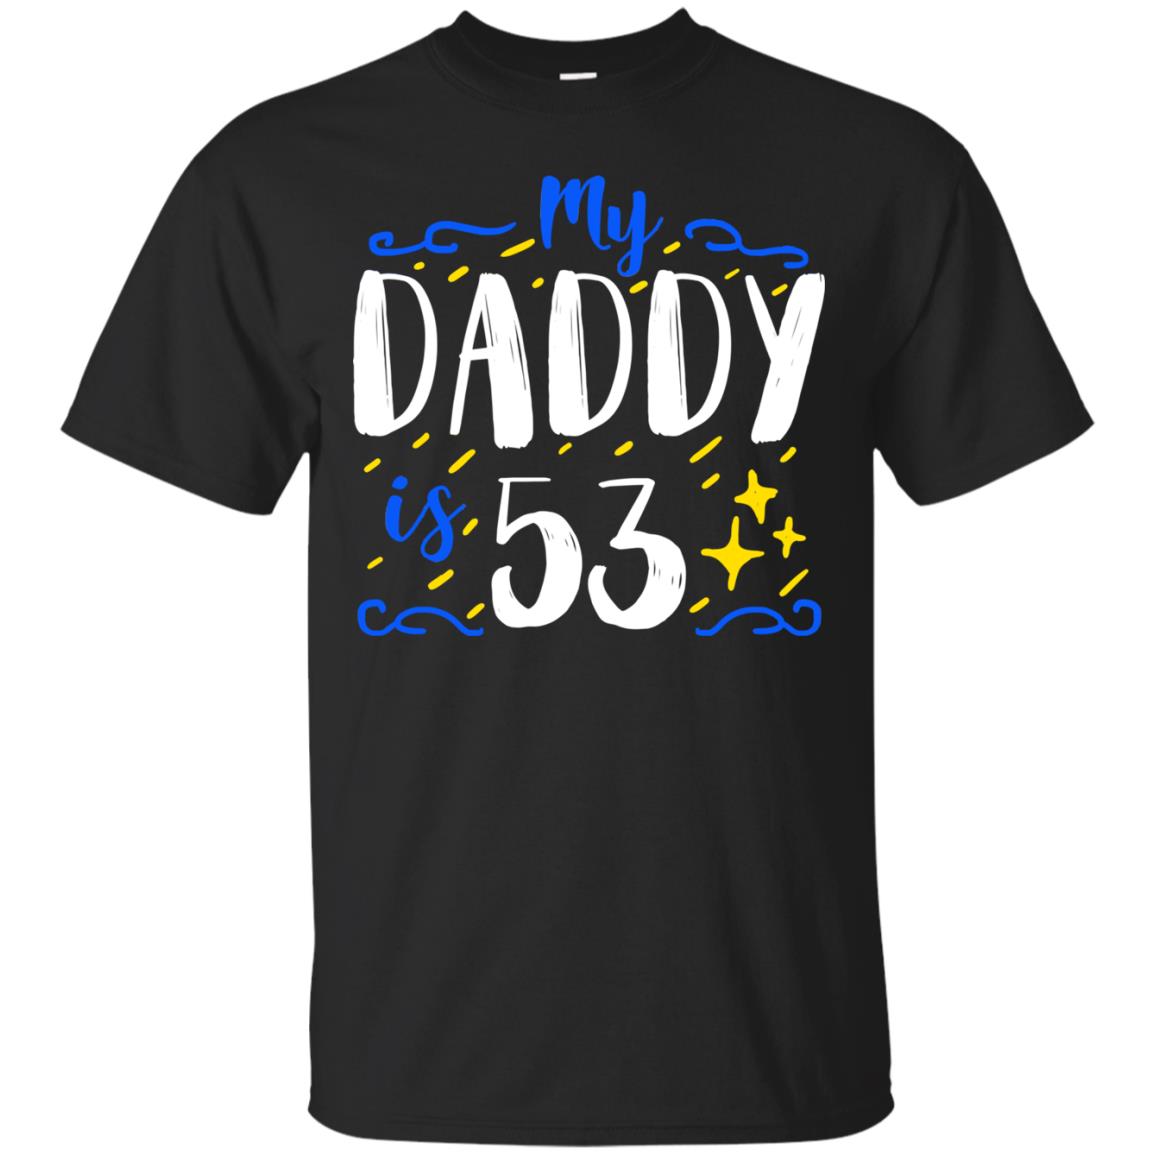 My Daddy Is 53 53rd Birthday Daddy Shirt For Sons Or DaughtersG200 Gildan Ultra Cotton T-Shirt